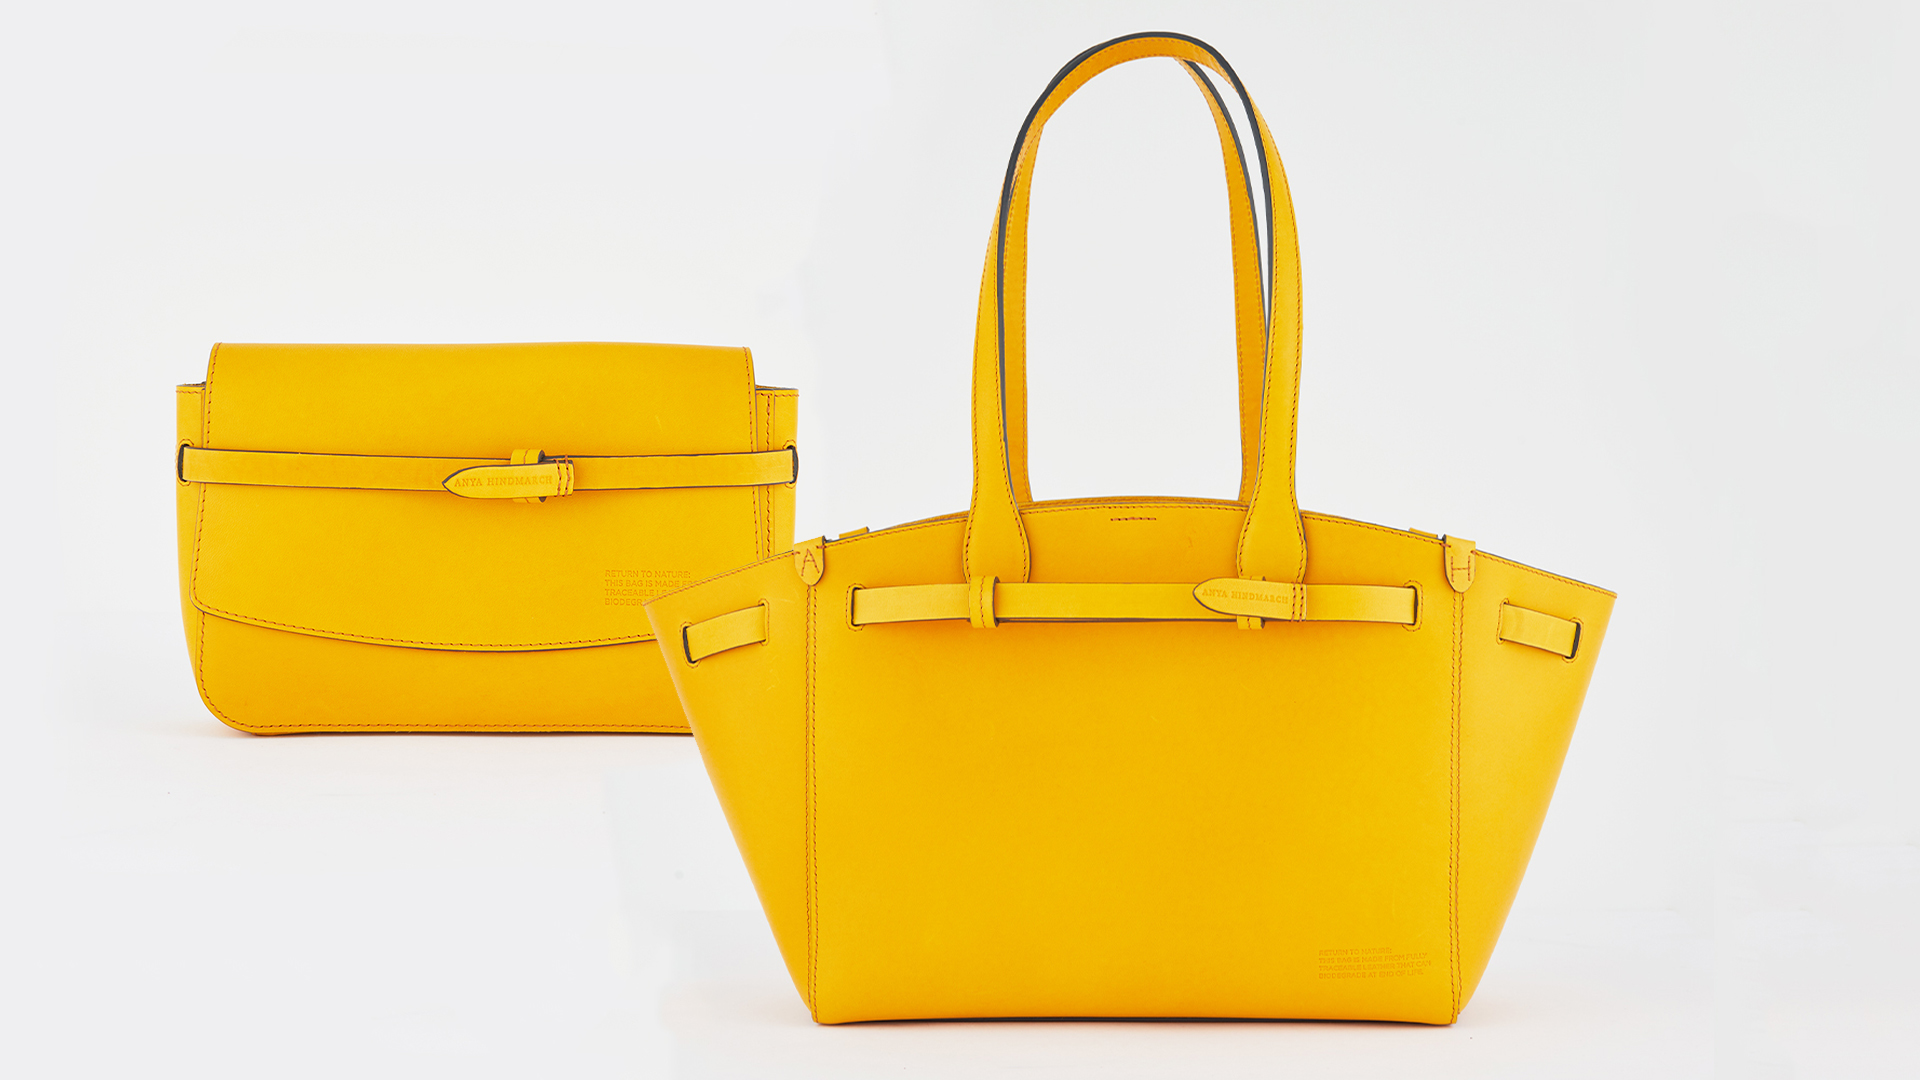 Anya Hindmarch leather bags